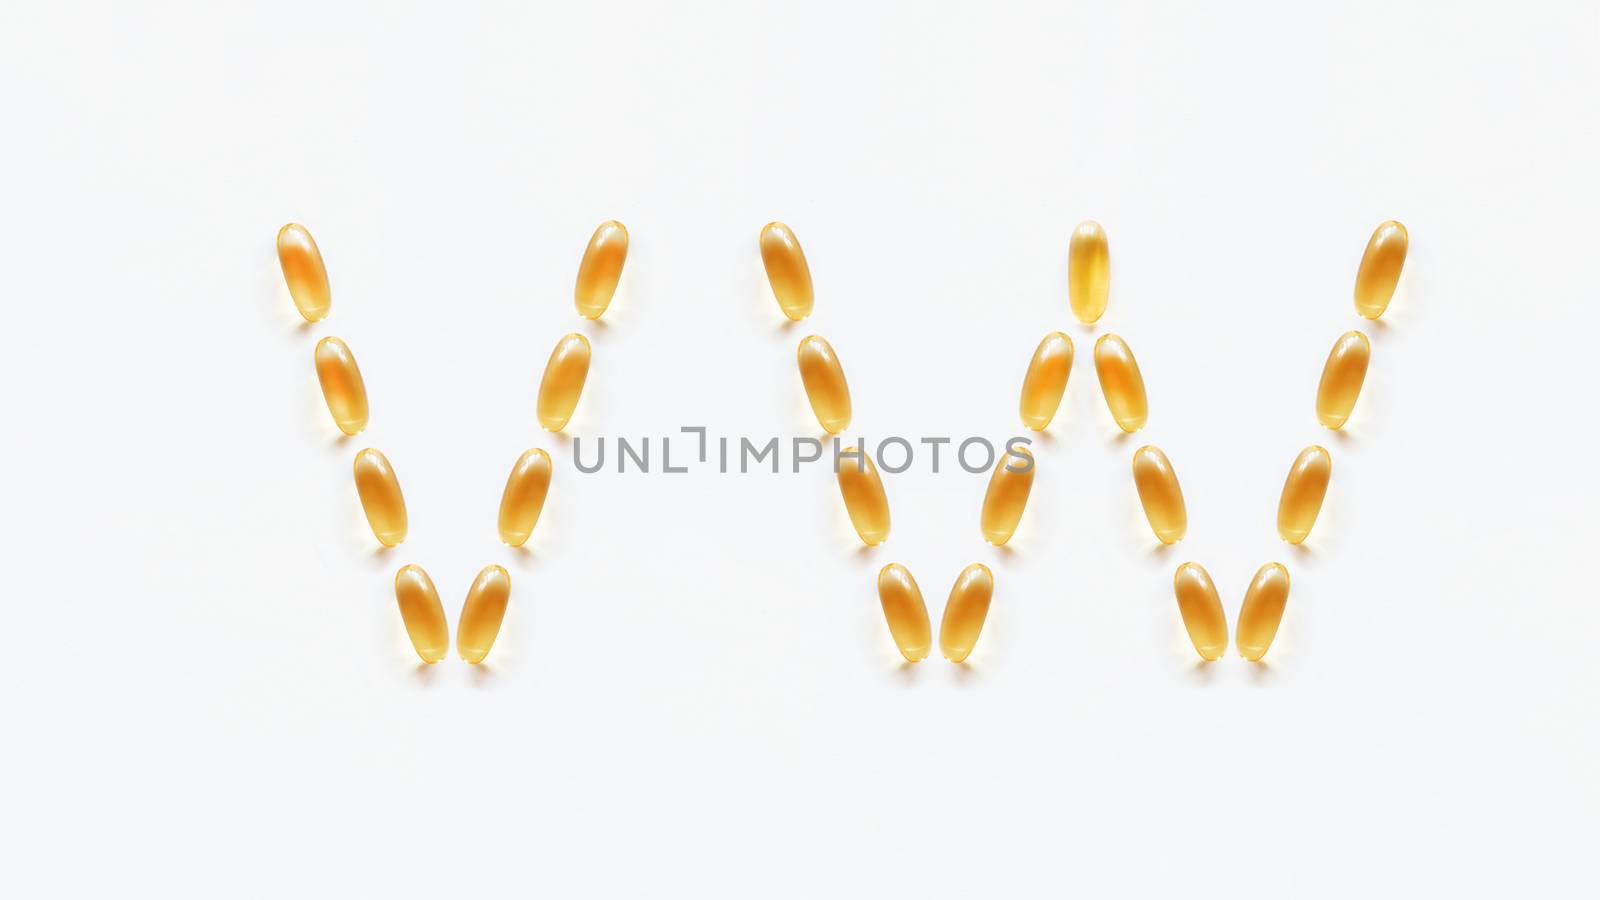 Letters V, W made of transparent yellow pills. Part 8 of latin alphabet in medical style. Isolated on white background.